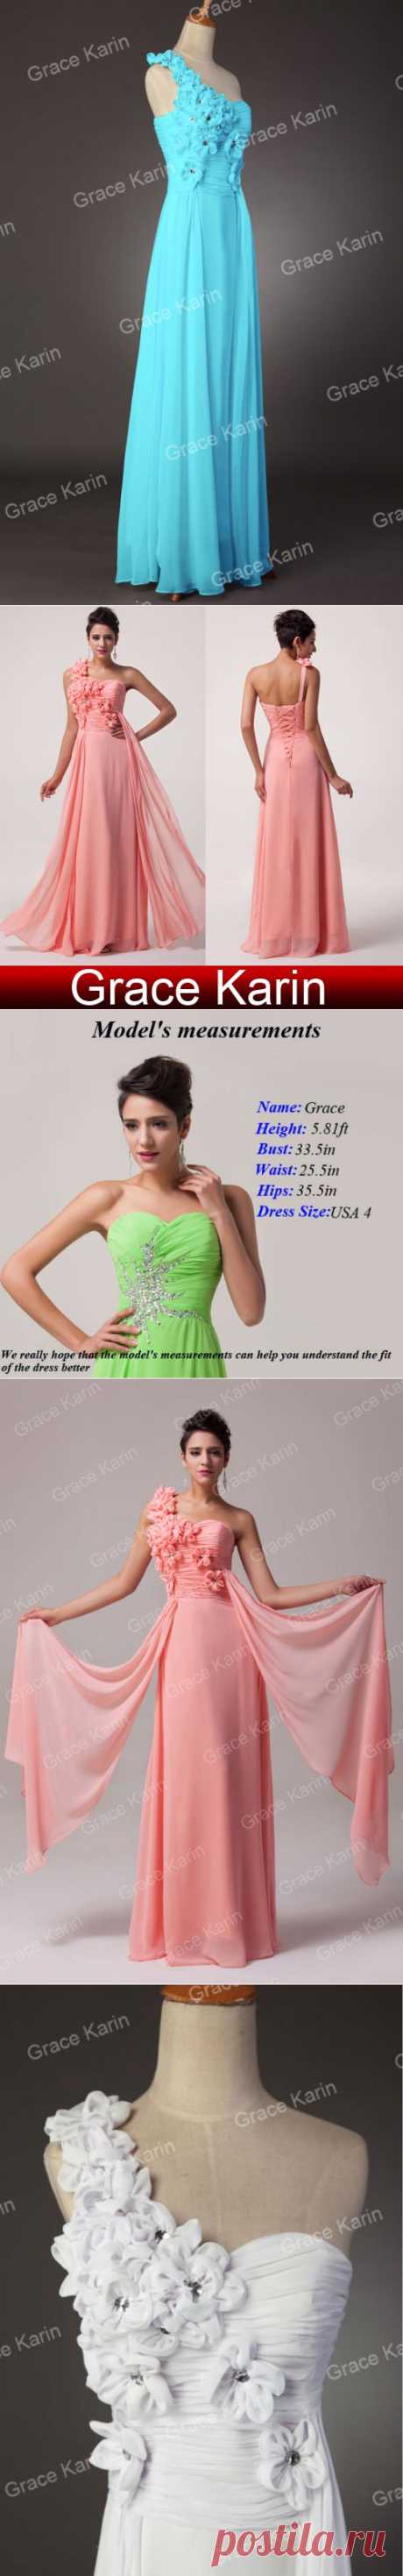 Aliexpress.com : Buy Fast Delivery! 1pc/lot Grace Karin New Designer One Shoulder Bandage Evening Gown Long Prom Dresses 2014 CL4526 from Reliable dress for any occasion suppliers on Elven Kingdom Party Dress Store